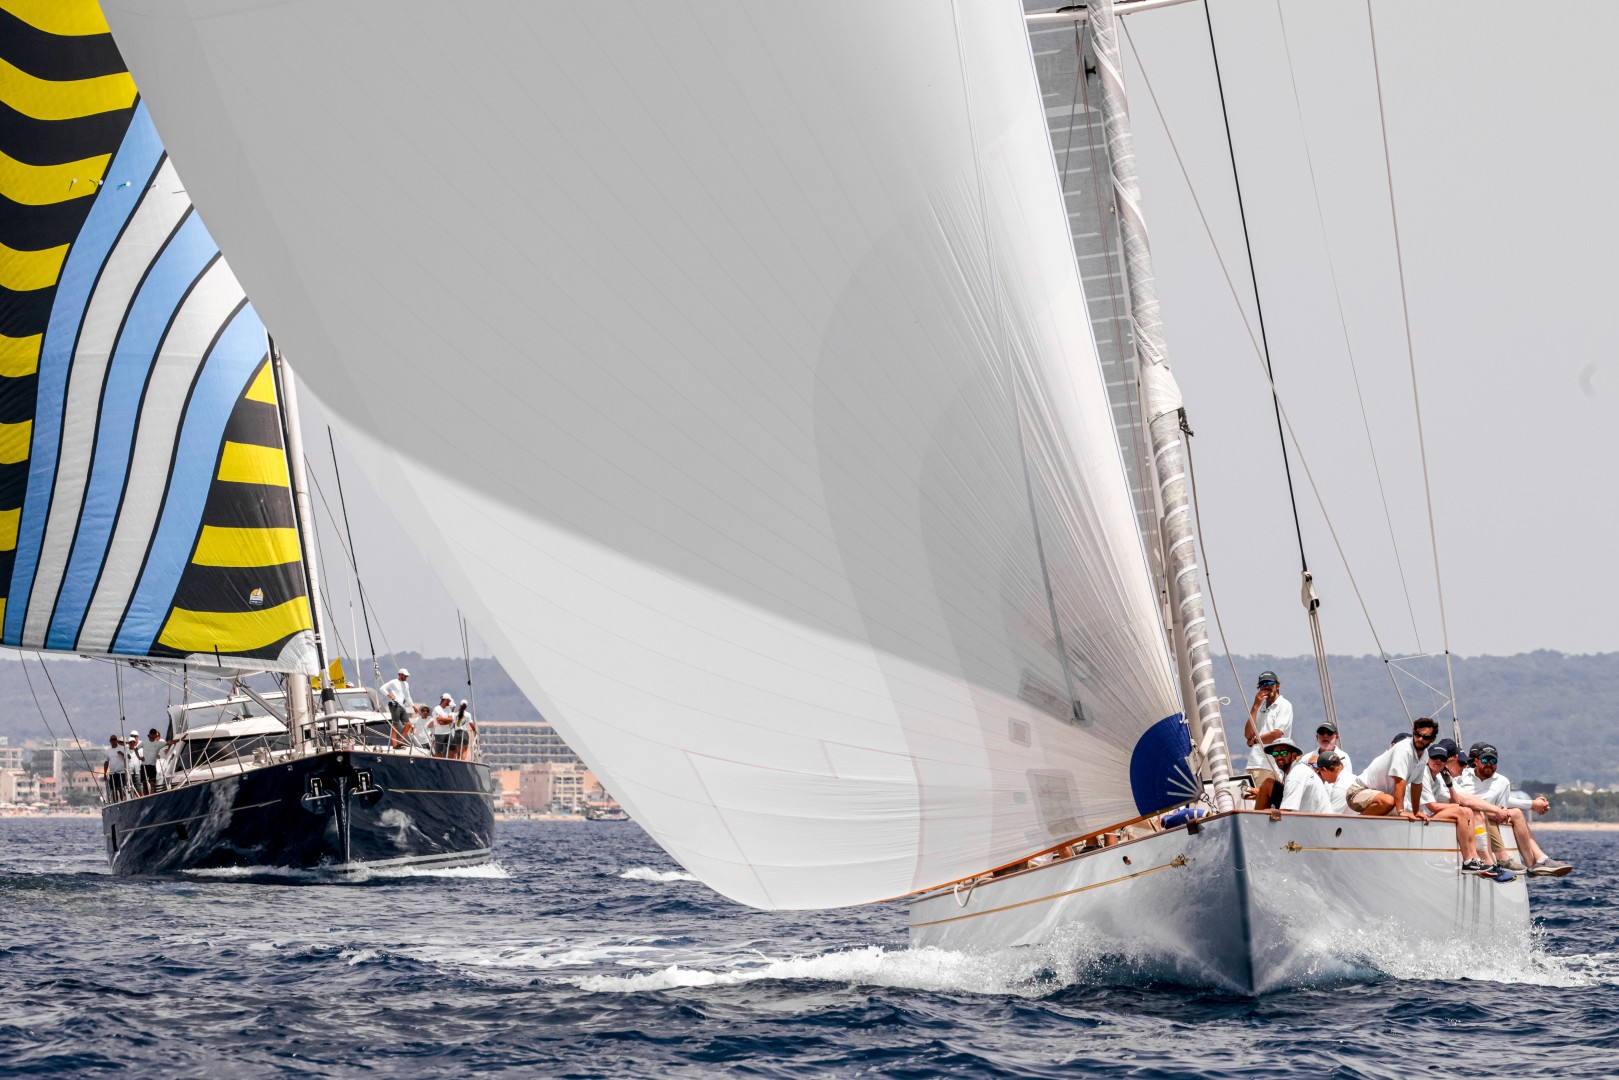 Entries are lining-up for Superyacht Cup Palma summer celebration